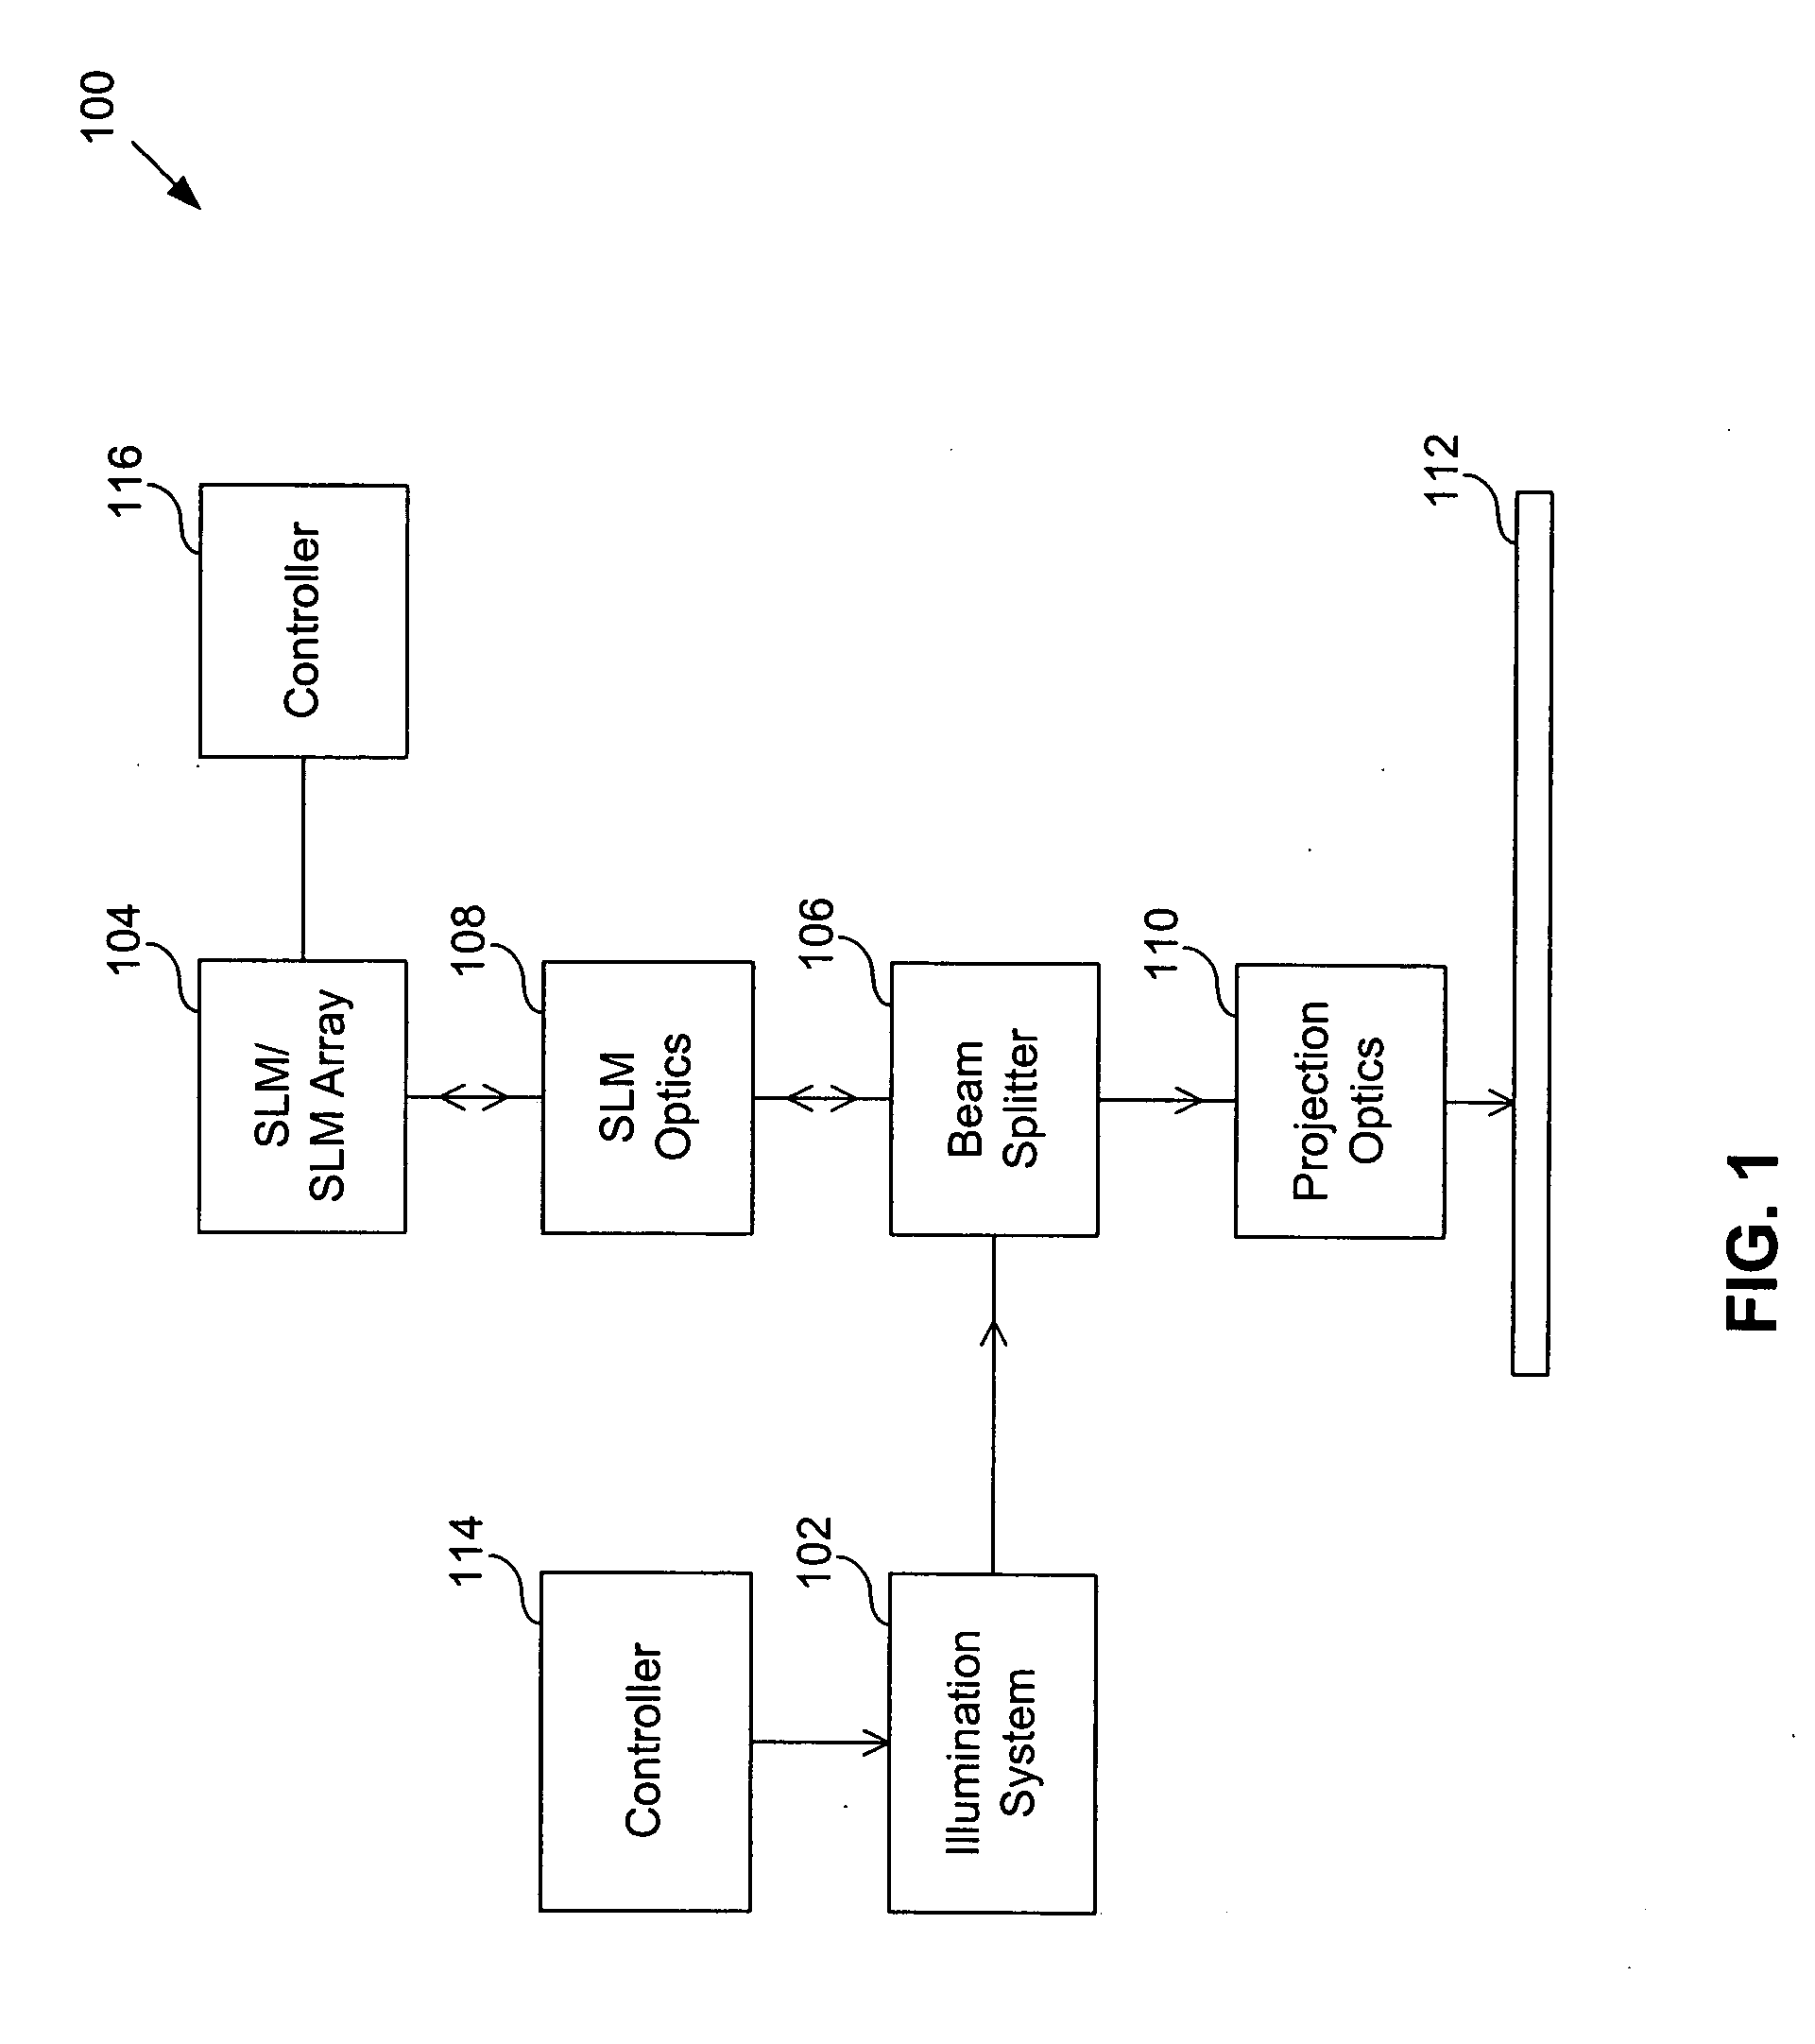 Maskless lithography systems and methods utilizing spatial light modulator arrays